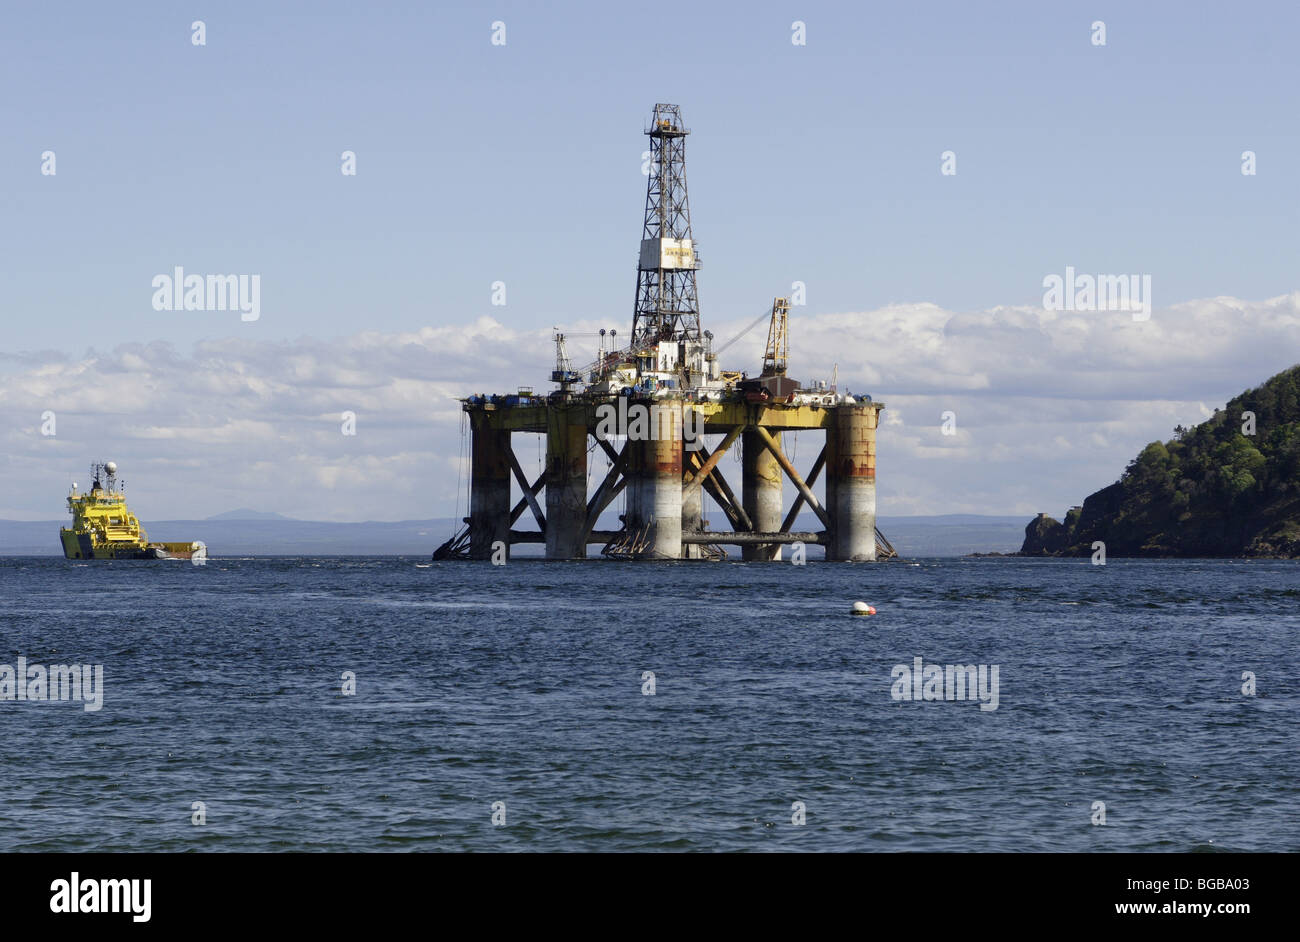 Scotland, Oil Rig Platform being pulled out to sea by tug vessel. Stock Photo